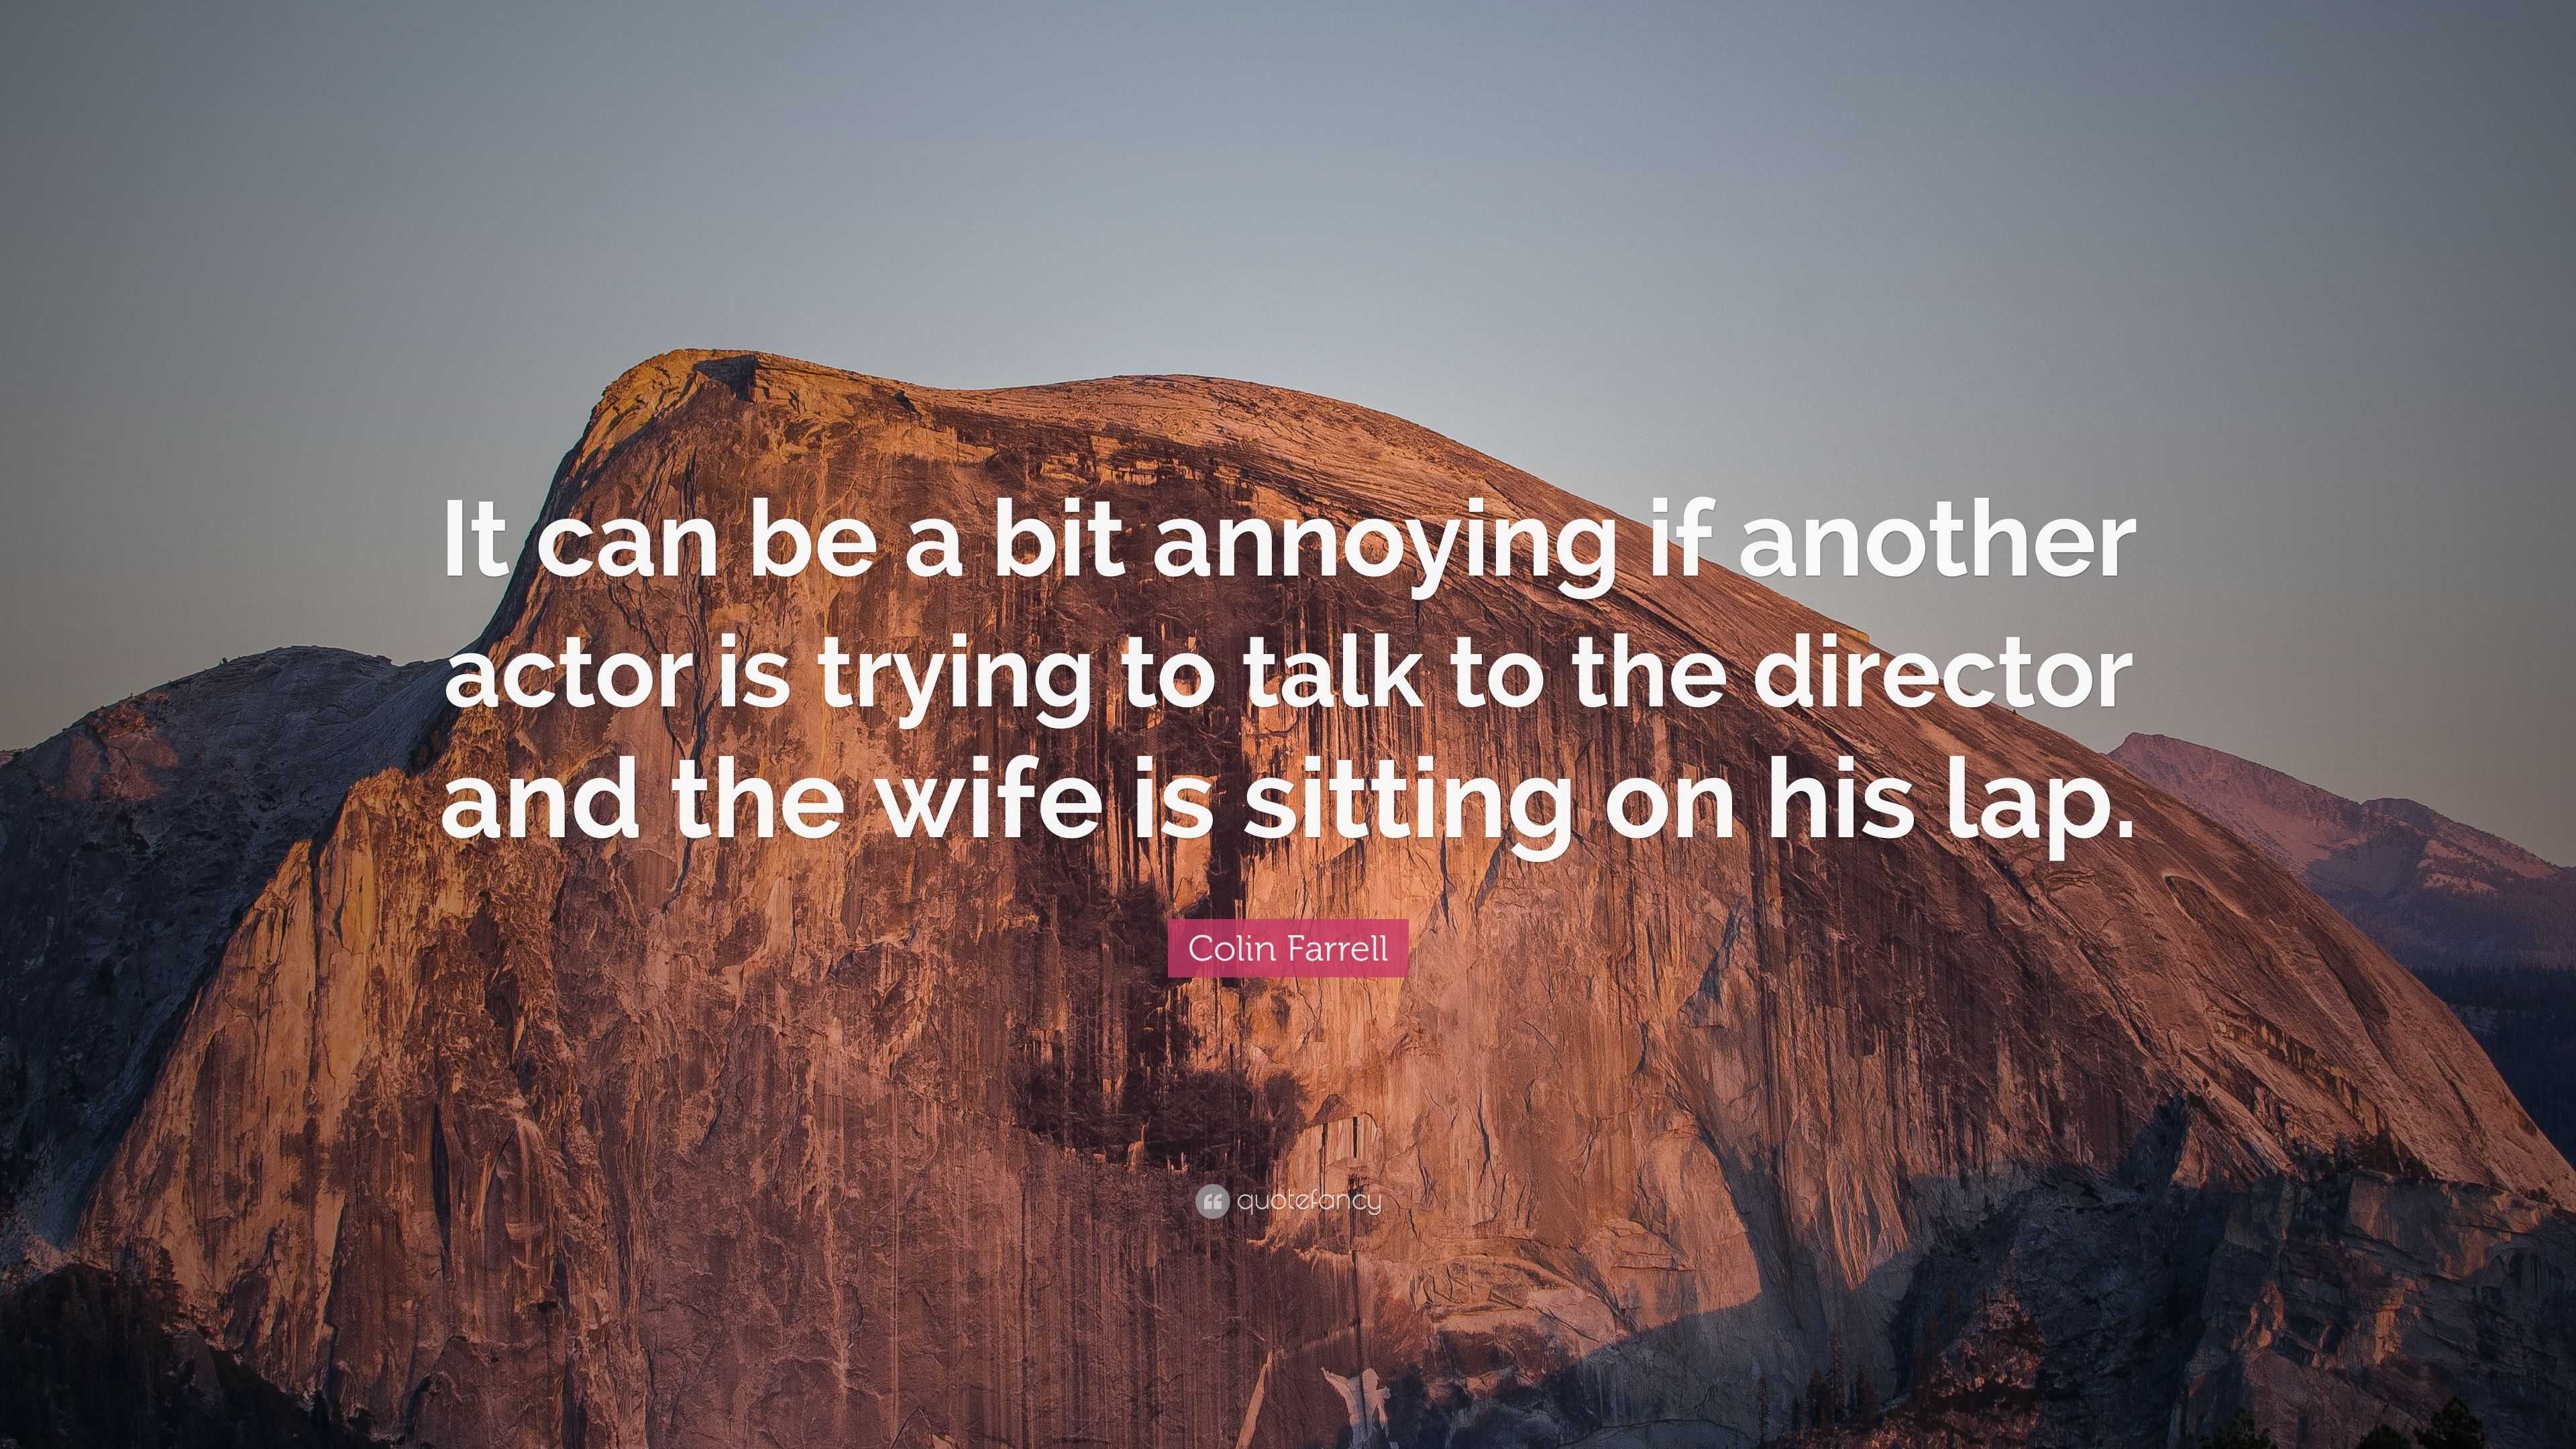 Colin Farrell Quote: “It can be a bit annoying if another actor is